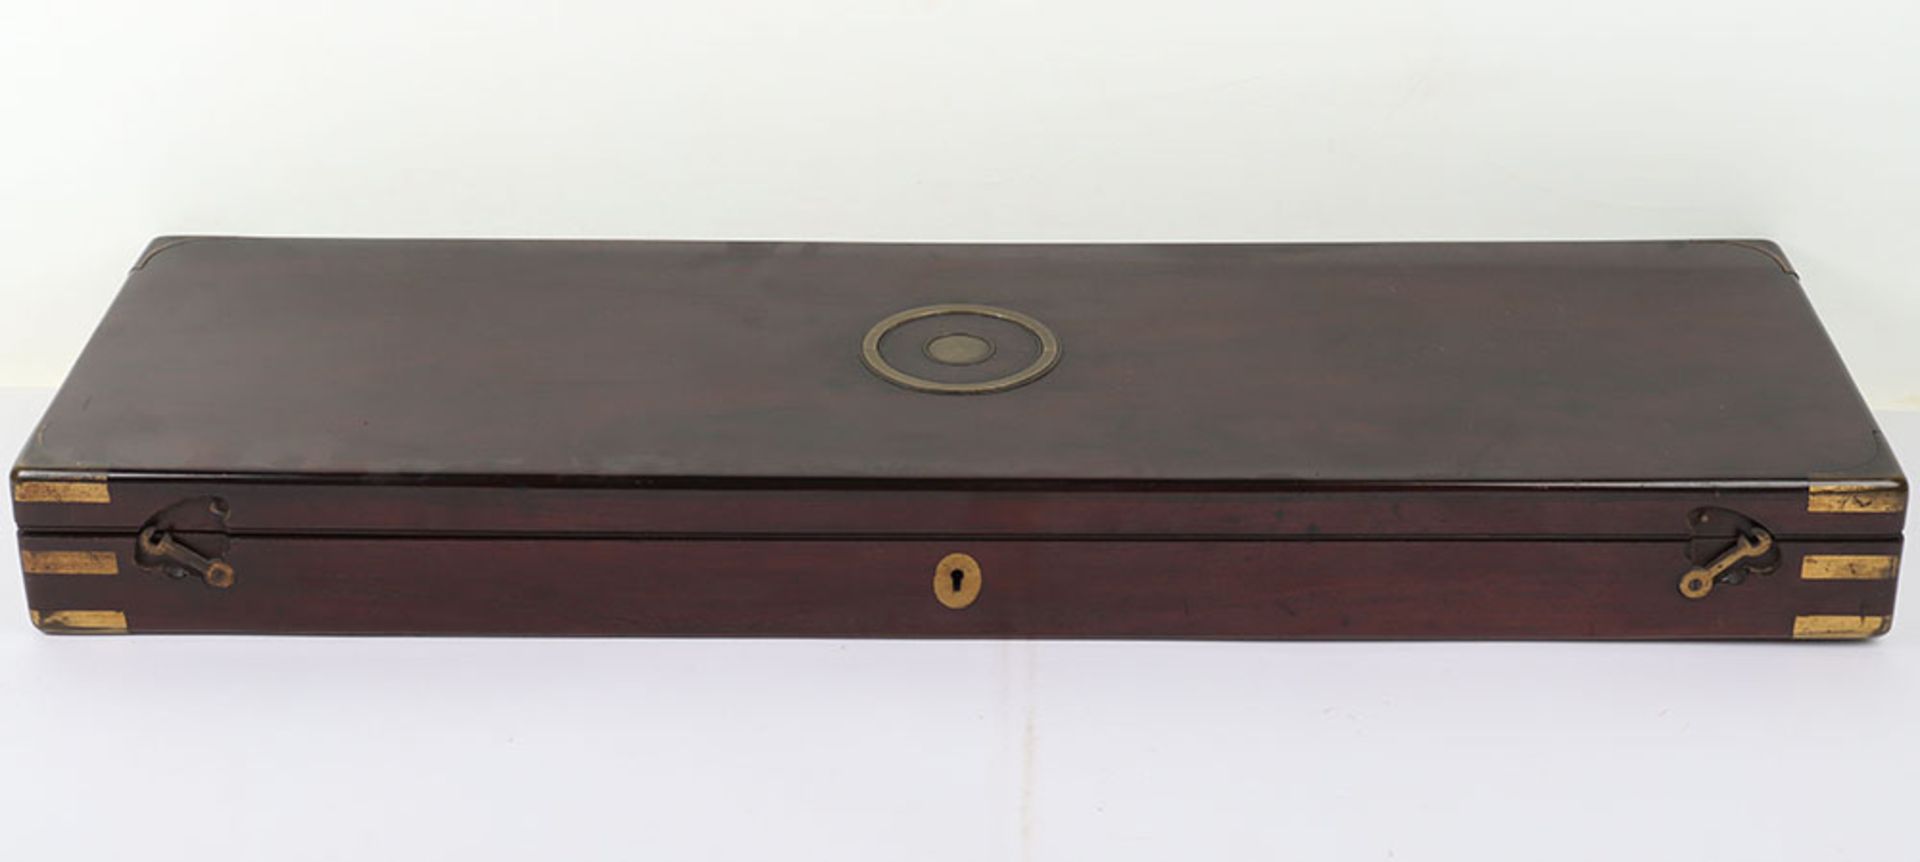 Good Brass Bound Mahogany Gun Case for a Double Barrel Percussion Gun or Rifle - Image 8 of 10